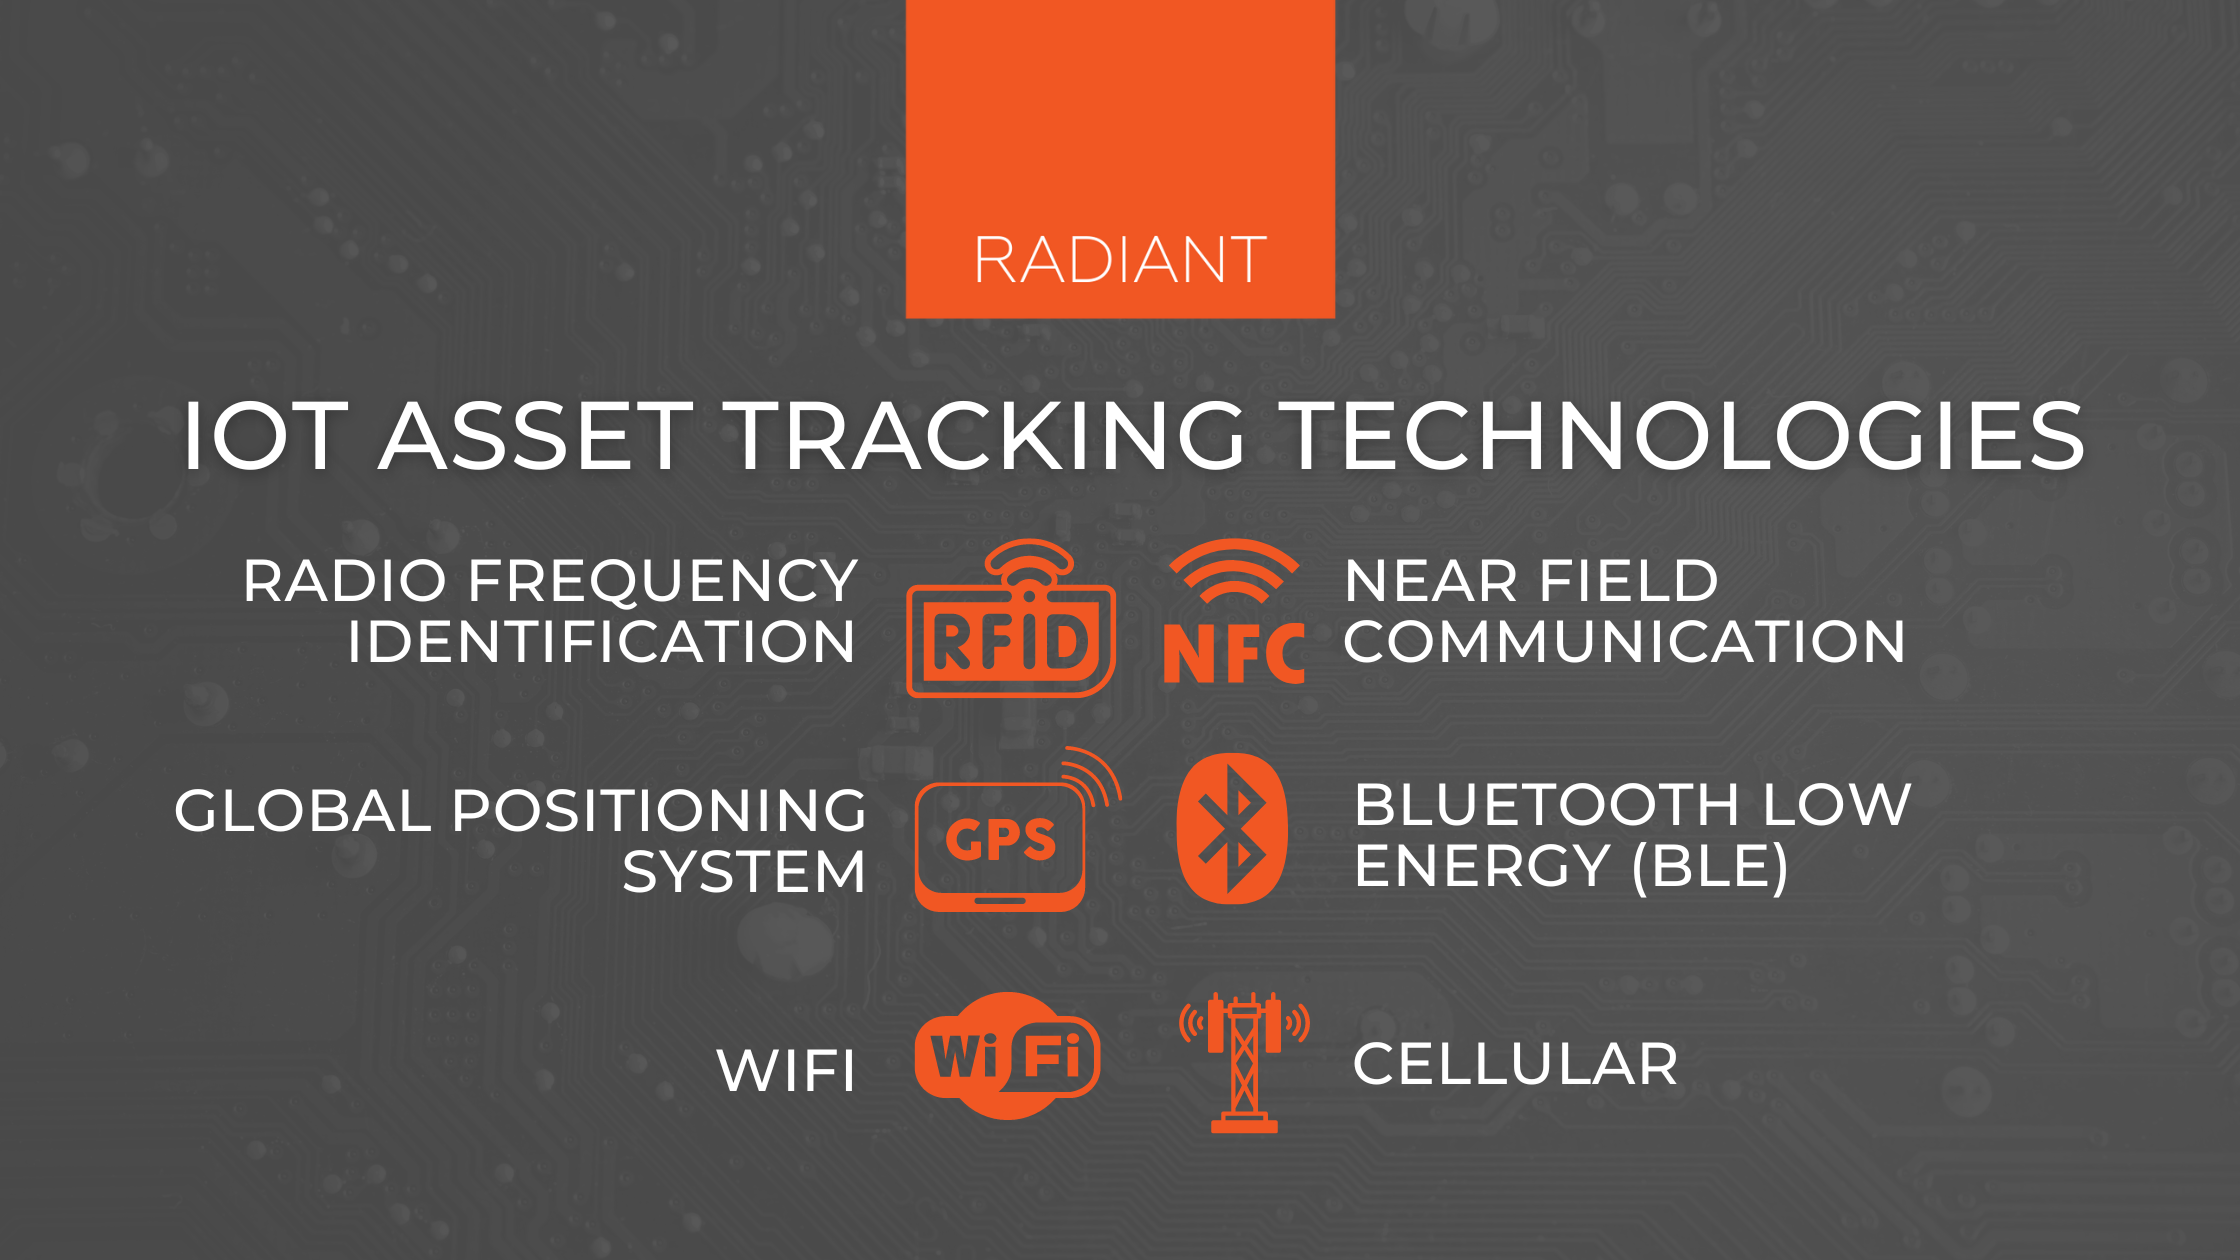 IoT Asset Tracking Technologies - Asset Tracking Technologies - Tracking Technologies - Asset Management Technologies - Asset Tracking Technology - Asset Management Technology - Combining Asset Tracking Technologies - Combining Asset Management Technologies - GPS Asset Tracking - Range Technology - Real Time Location System - Asset Tracking Software - Cellular Asset Tracking - Types Of Asset Tracking